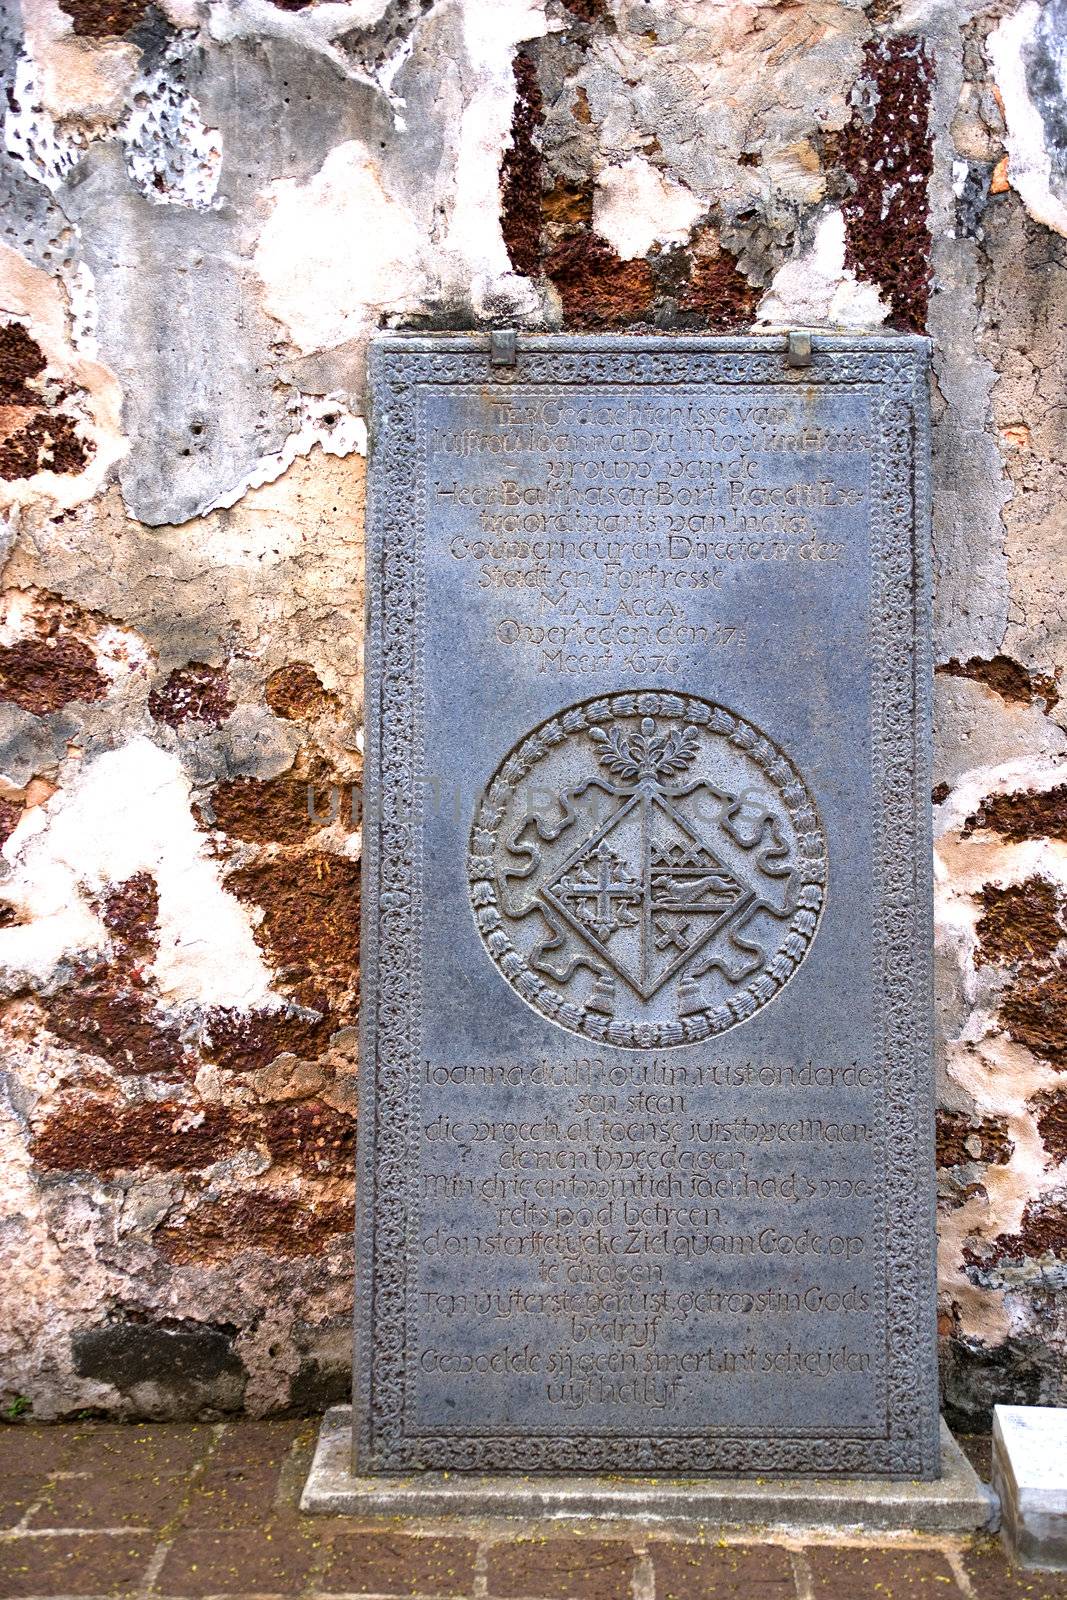 An ancient 17th century Dutch tombstone found at the ruins of St. Paul's Church, originally built by the Portuguese in 1521 at the UNESCO World Heritage site of Malacca, Malaysia.